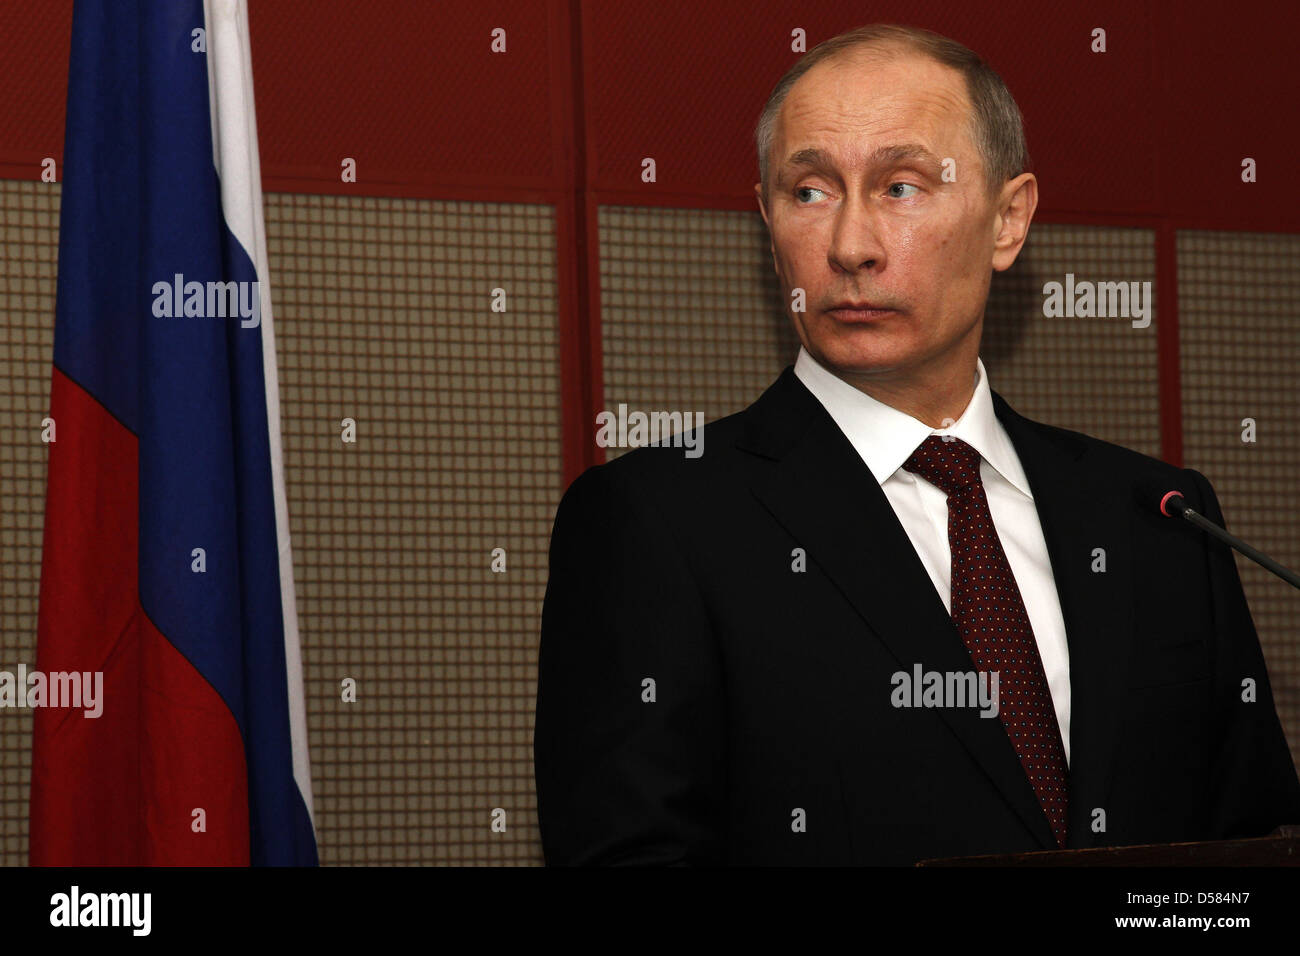 Durban, South Africa, USA. 26th March, 2013. Vladimir Putin listens as South Africa's President Jacob Zuma speaks. Moments earlier Putin signed a bilateral agreement with Zuma improving the countries ties. The signing took place ahead of the Fifth Brics Summit in Durban. Picture: Giordano Stolley/Alamy Live News Stock Photo